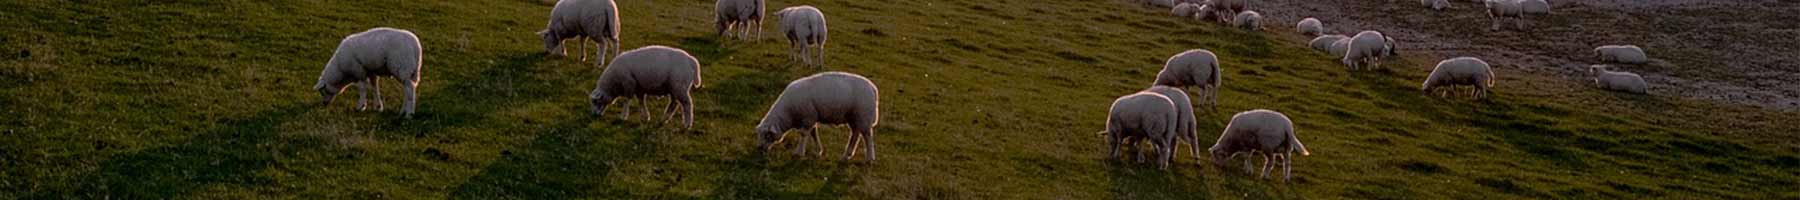 sheep grazing in the evening